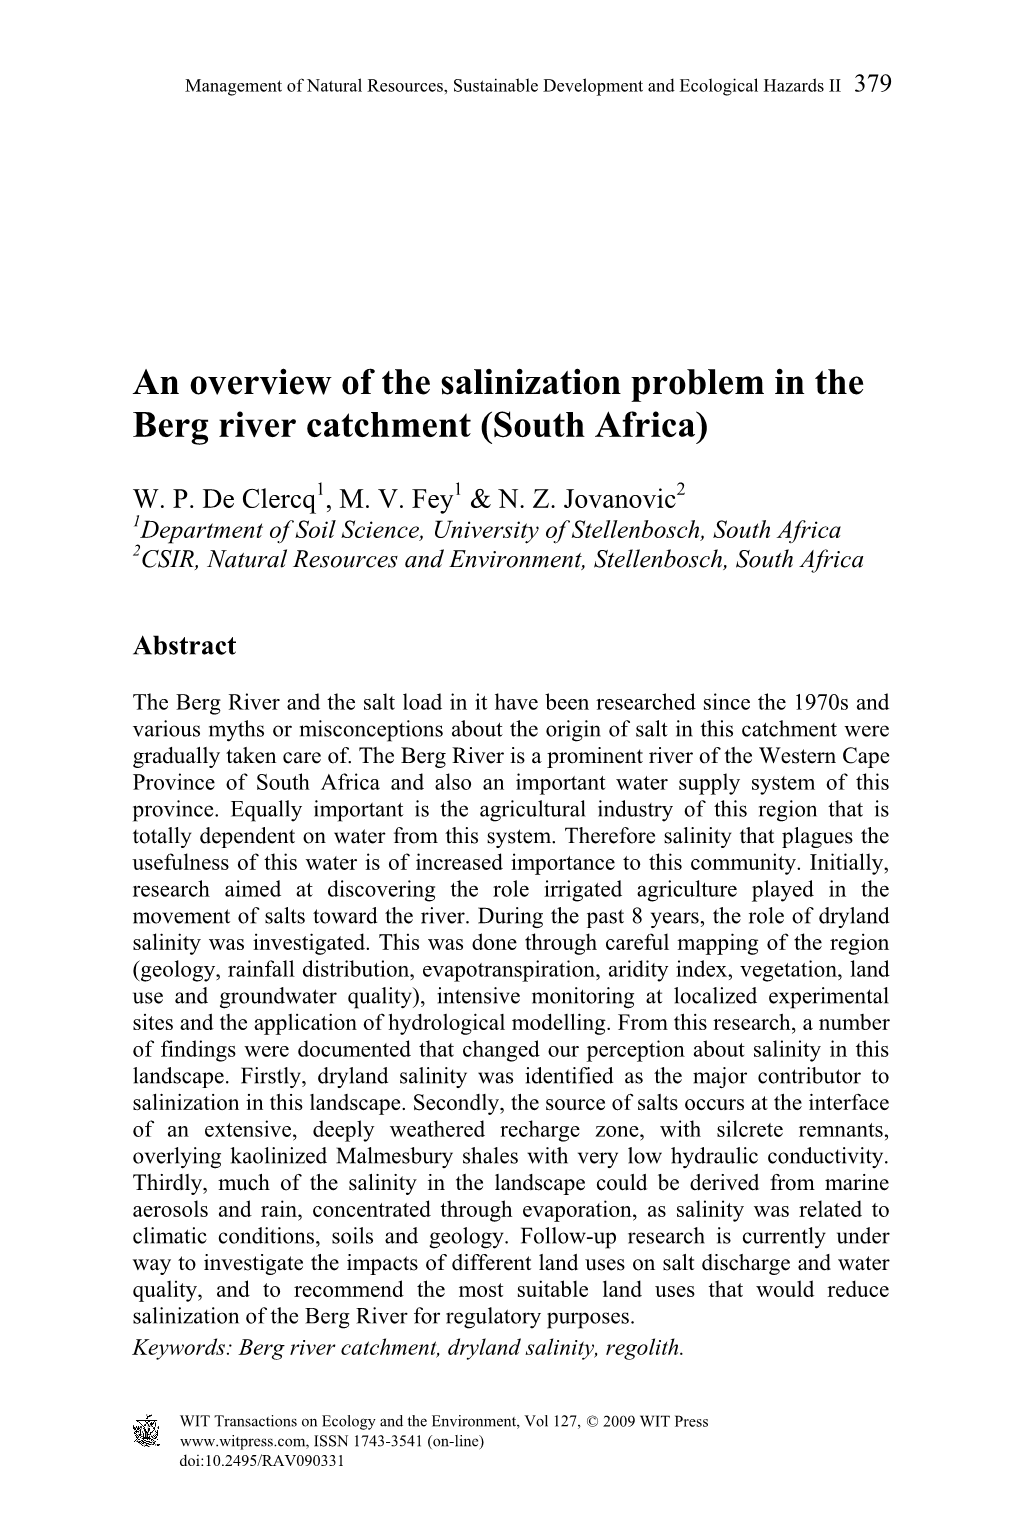 An Overview of the Salinization Problem in the Berg River Catchment (South Africa)